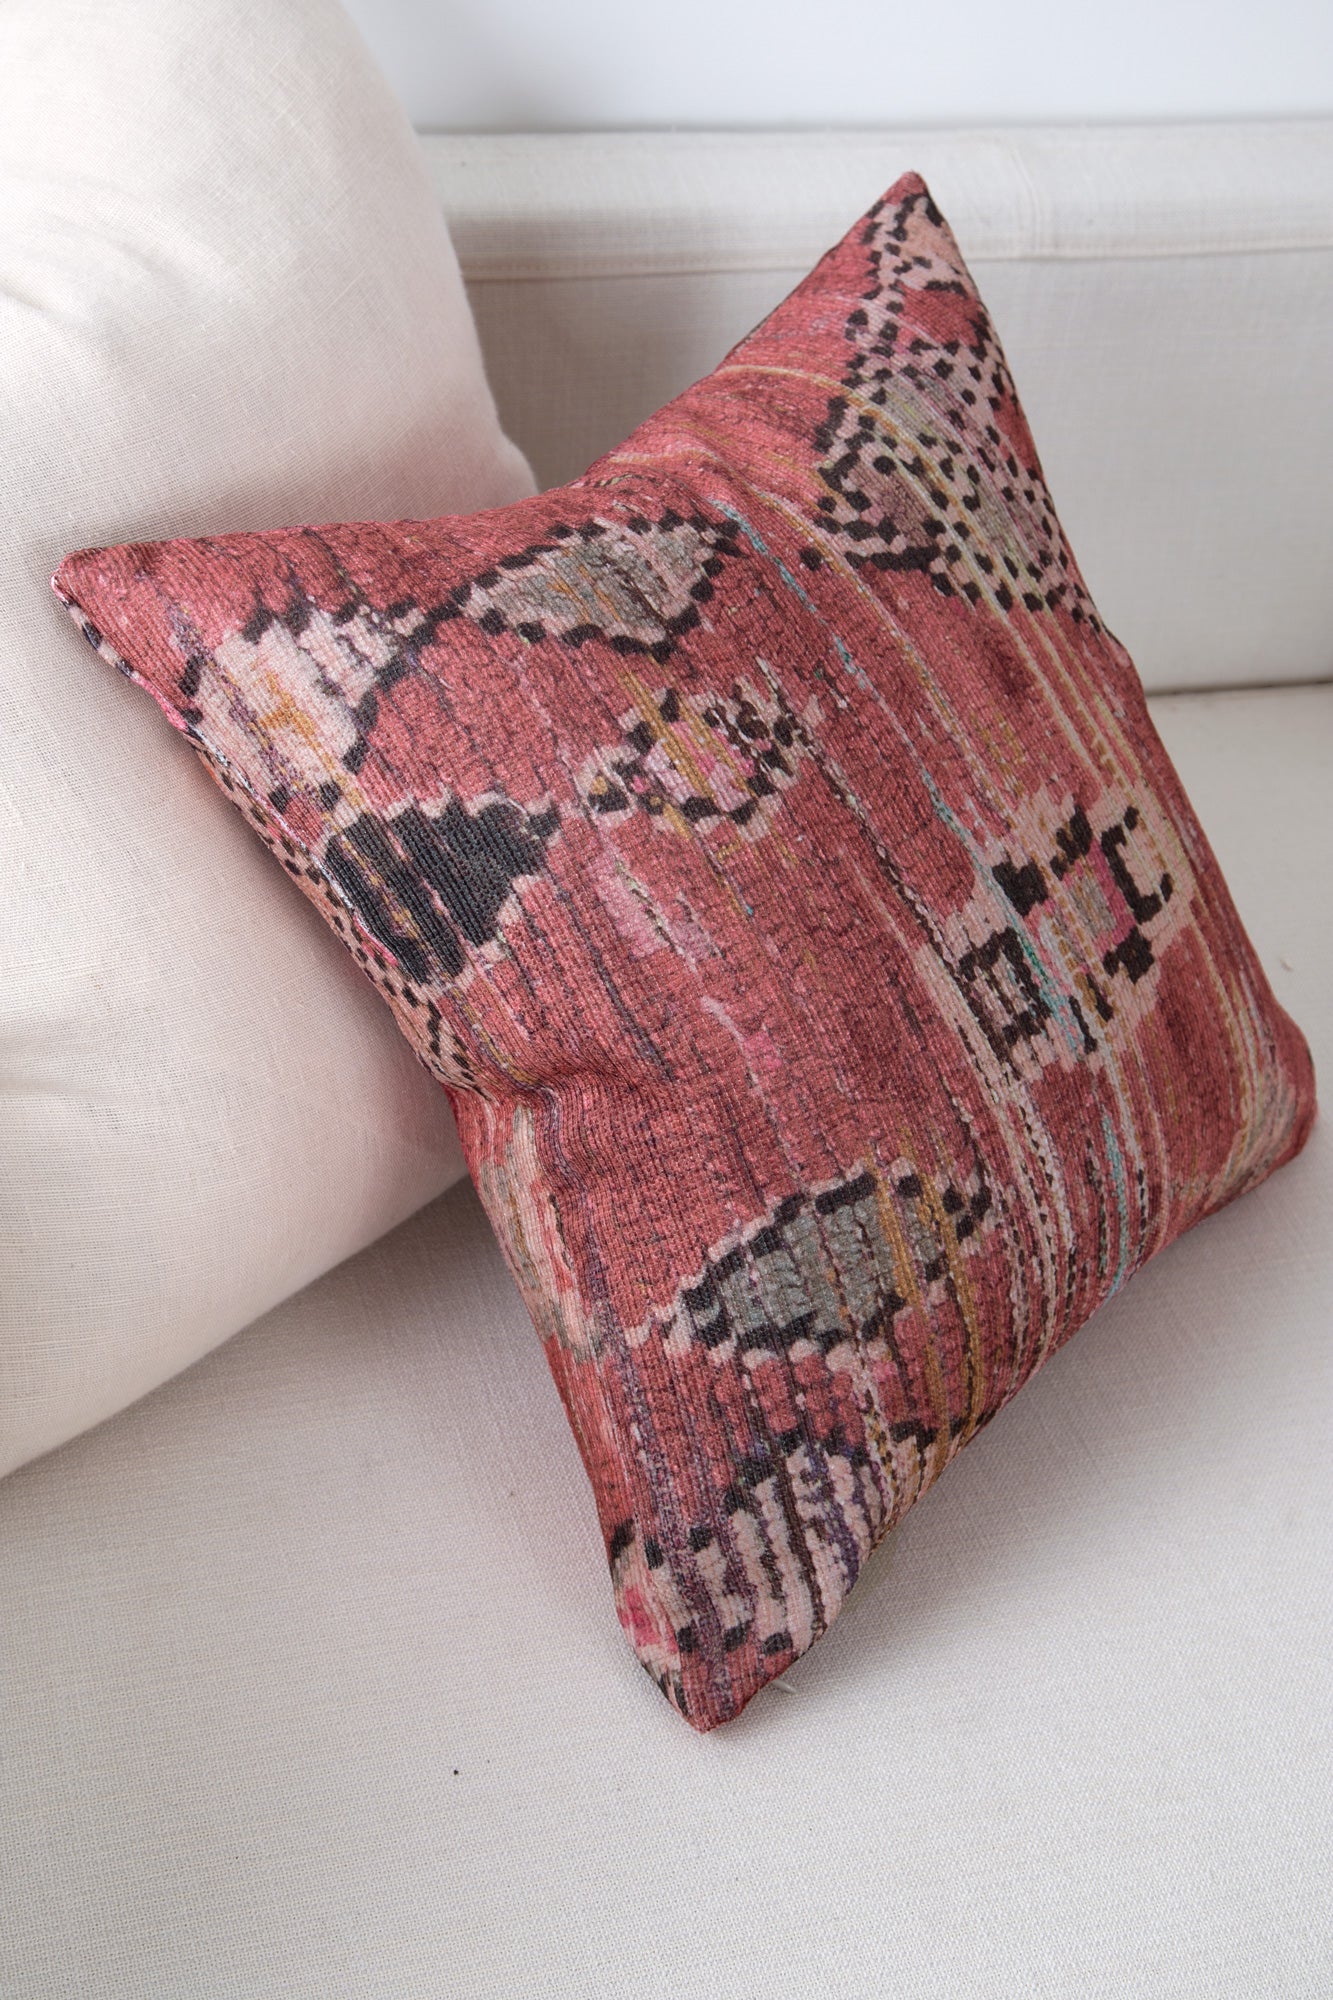 Vintage Chaima Rose Pillow on side